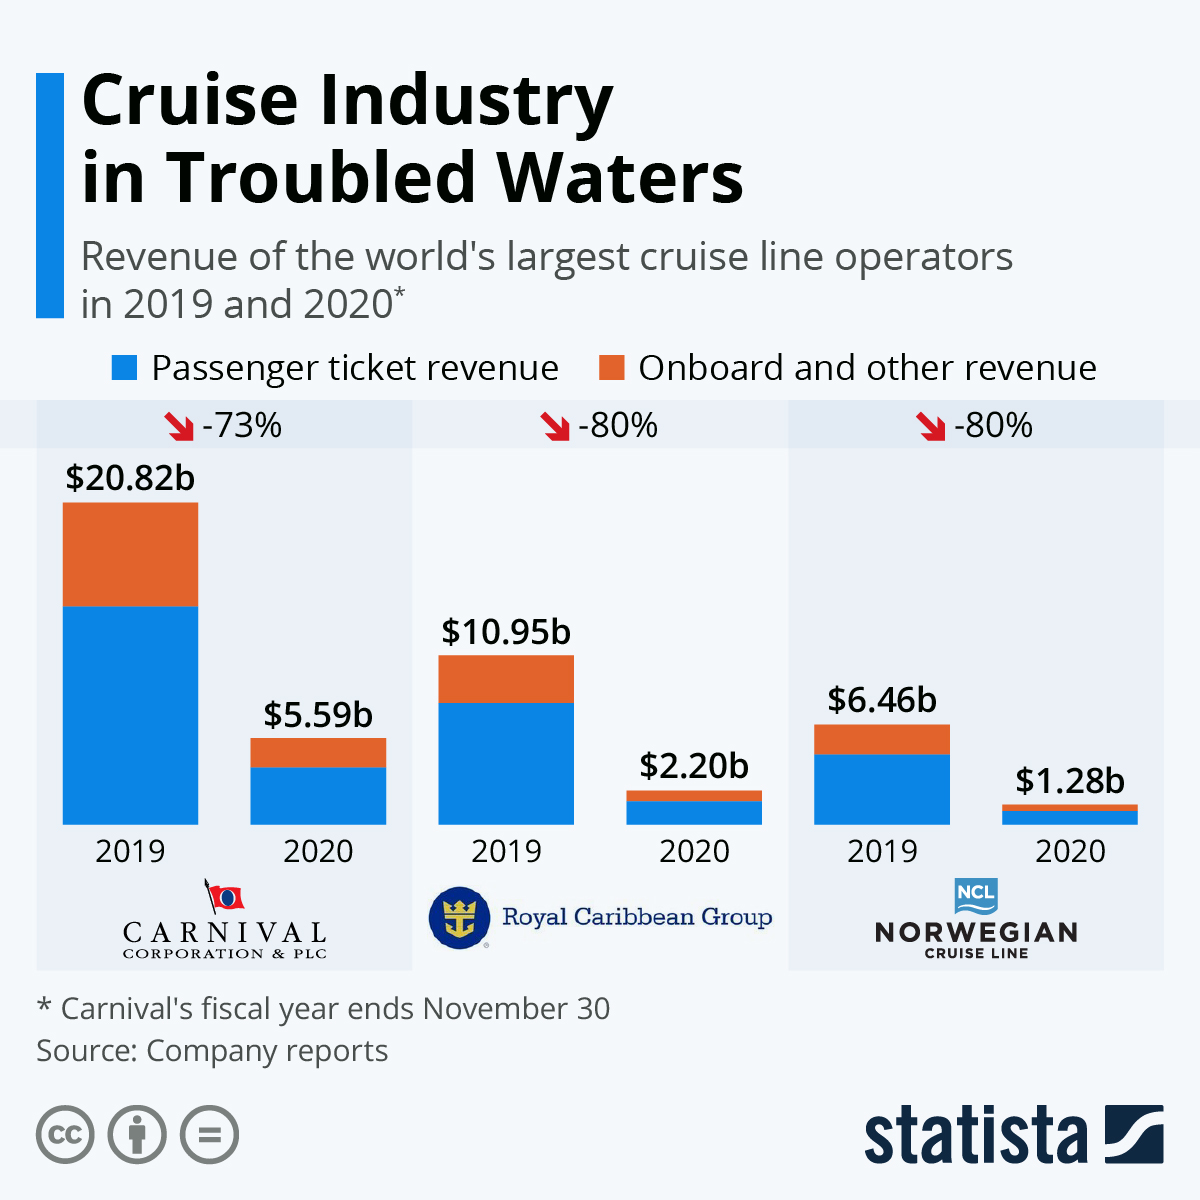 Cruise Industry in Troubled Waters